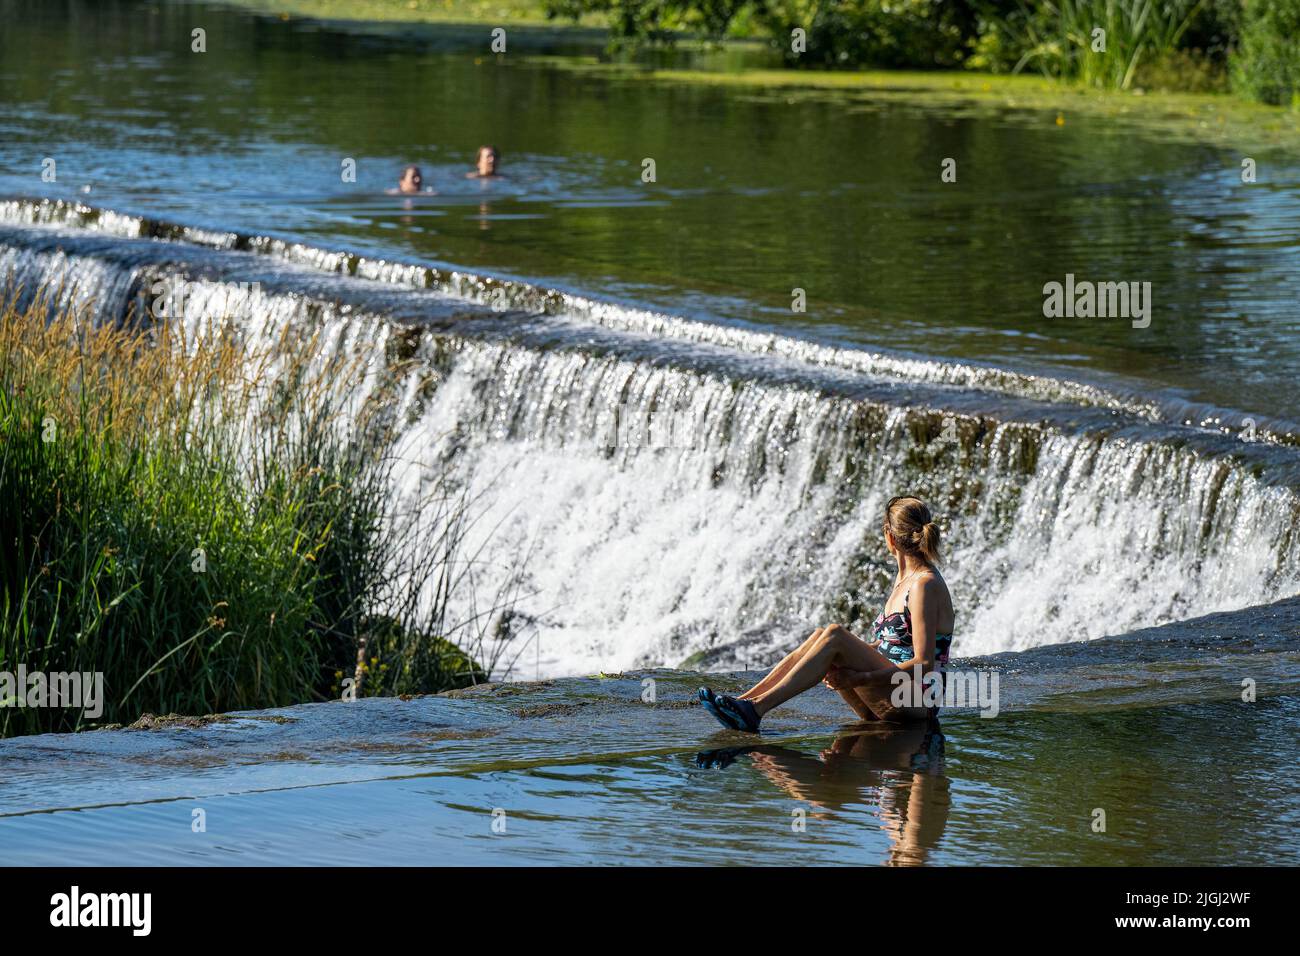 People cool off in the river Avon at Warleigh Weir near Bath in Somerset as temperatures continue to soar across the United Kingdom. Stock Photo